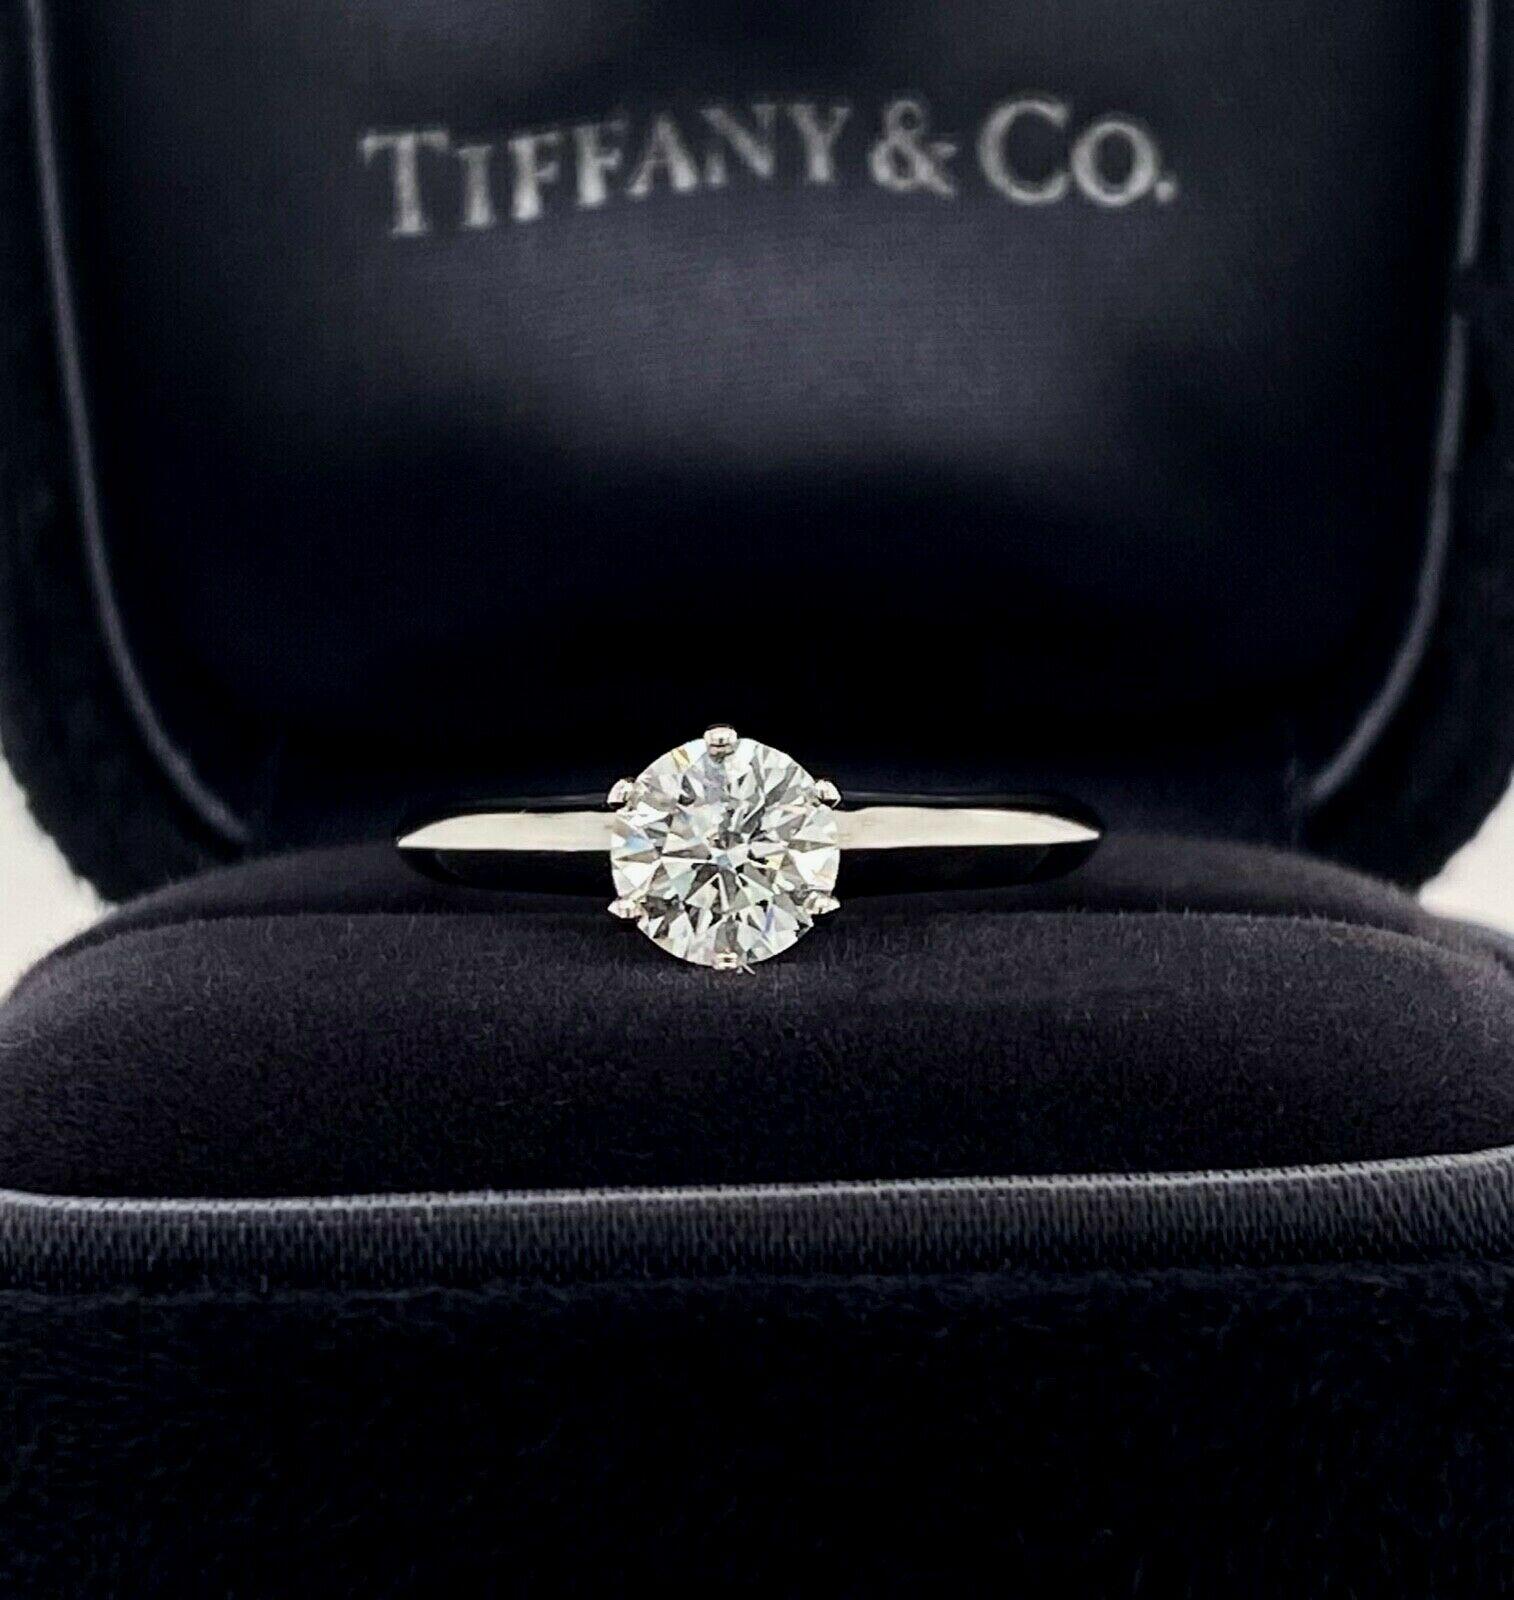 Tiffany & Co Round Brilliant Solitaire Engagement Ring featuring a 0.74 ct Center G color, VVS1 clarity, finely crafted in a 6 prong Platinum Mounting. ( Current Retail for $9,300 )
Includes Original Tiffany certificate and Box. 

Stamped: Tiffany &